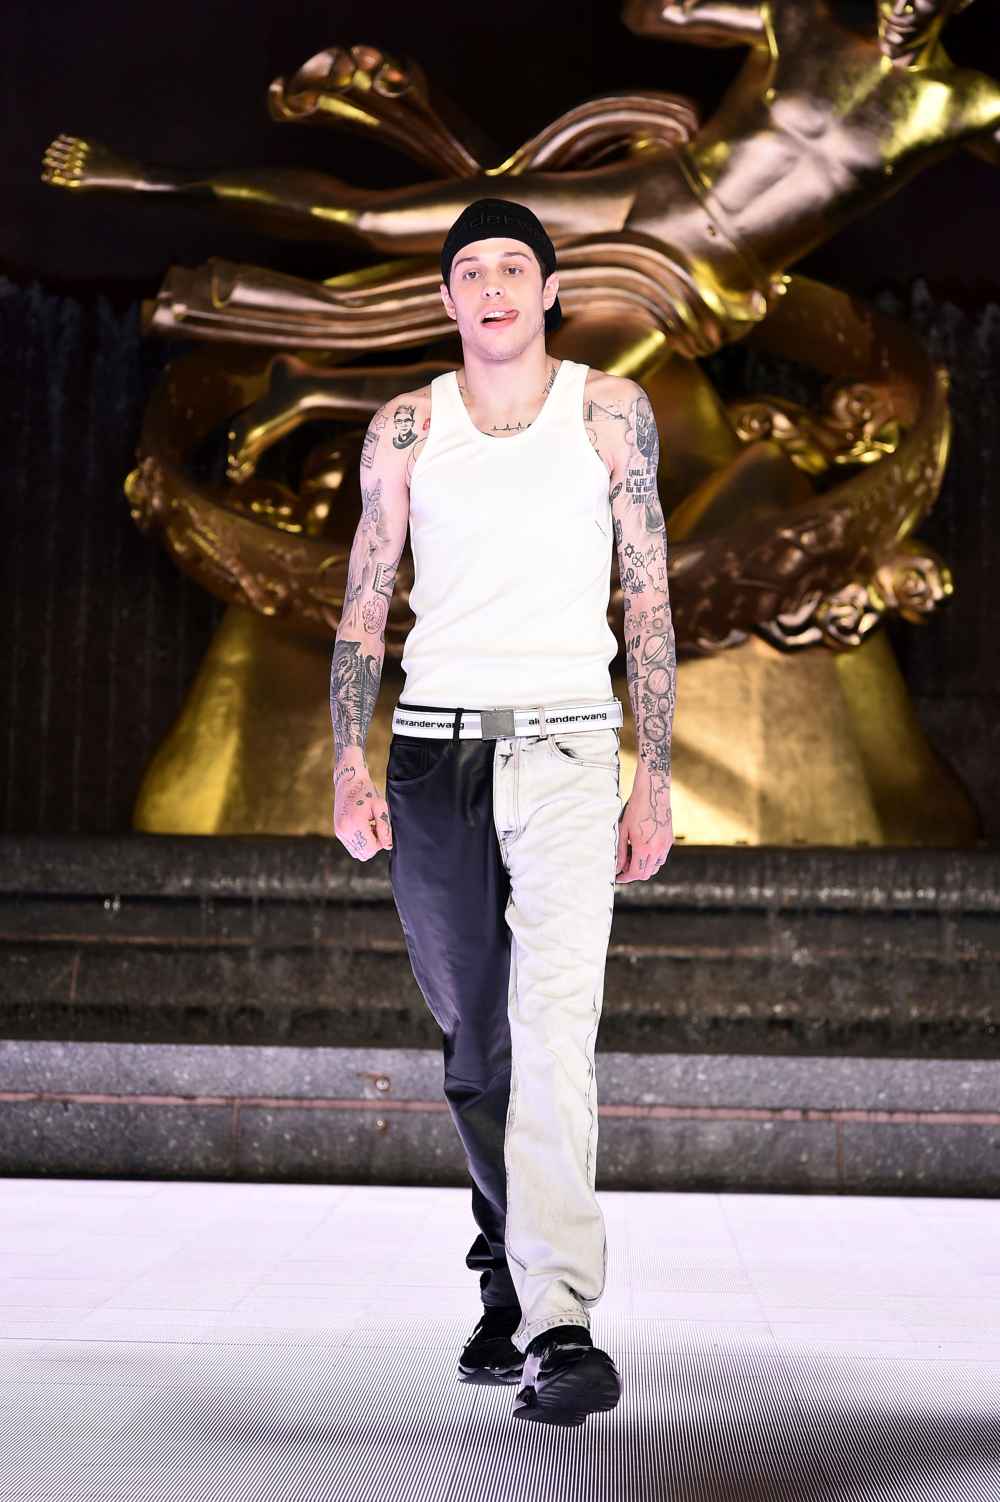 https://www.usmagazine.com/wp-content/uploads/2019/06/Pete-Davidson-Started-Out-Awkward-But-Finished-Confident-in-Runway-Debut-at-Alexander-Wang-Fashion-Show-main-1.jpg?w=1000&quality=40&strip=all